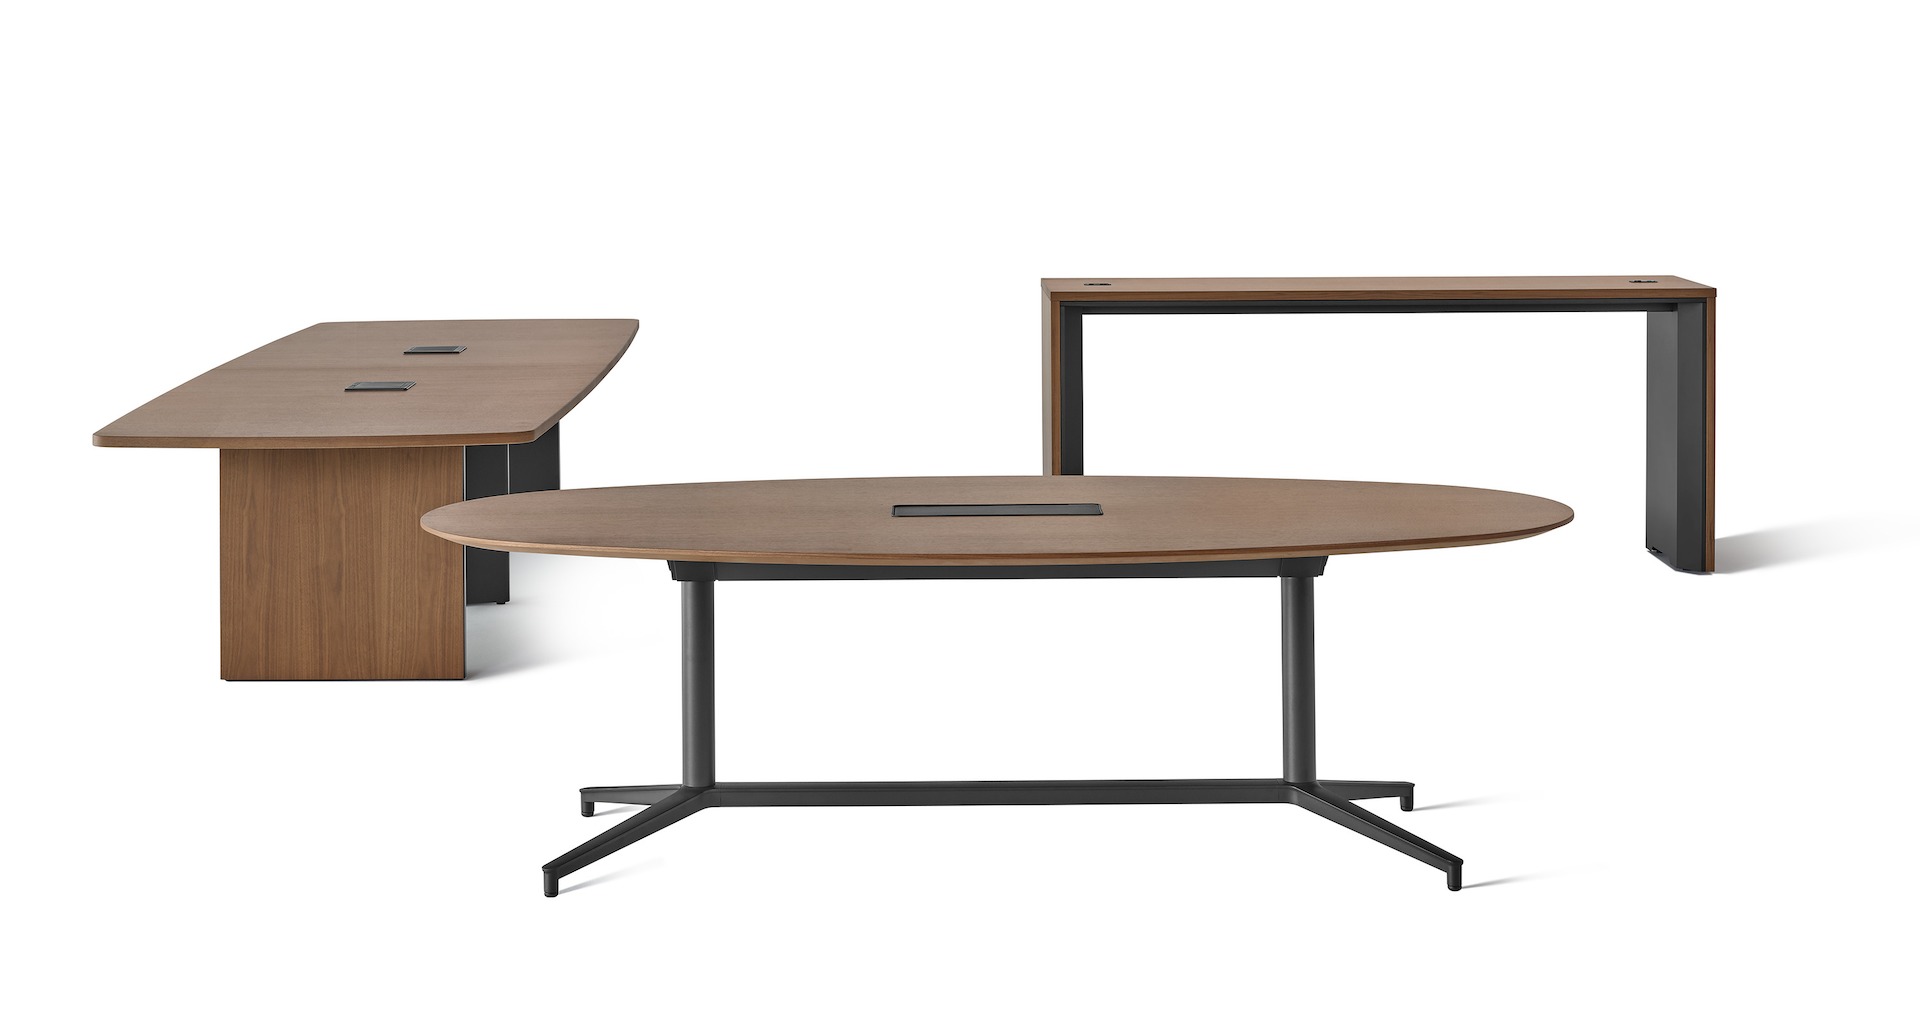 The family of Headway tables including a cabinet base table viewed at an angle, a Y base table, and a communal table in a darker wood tone.